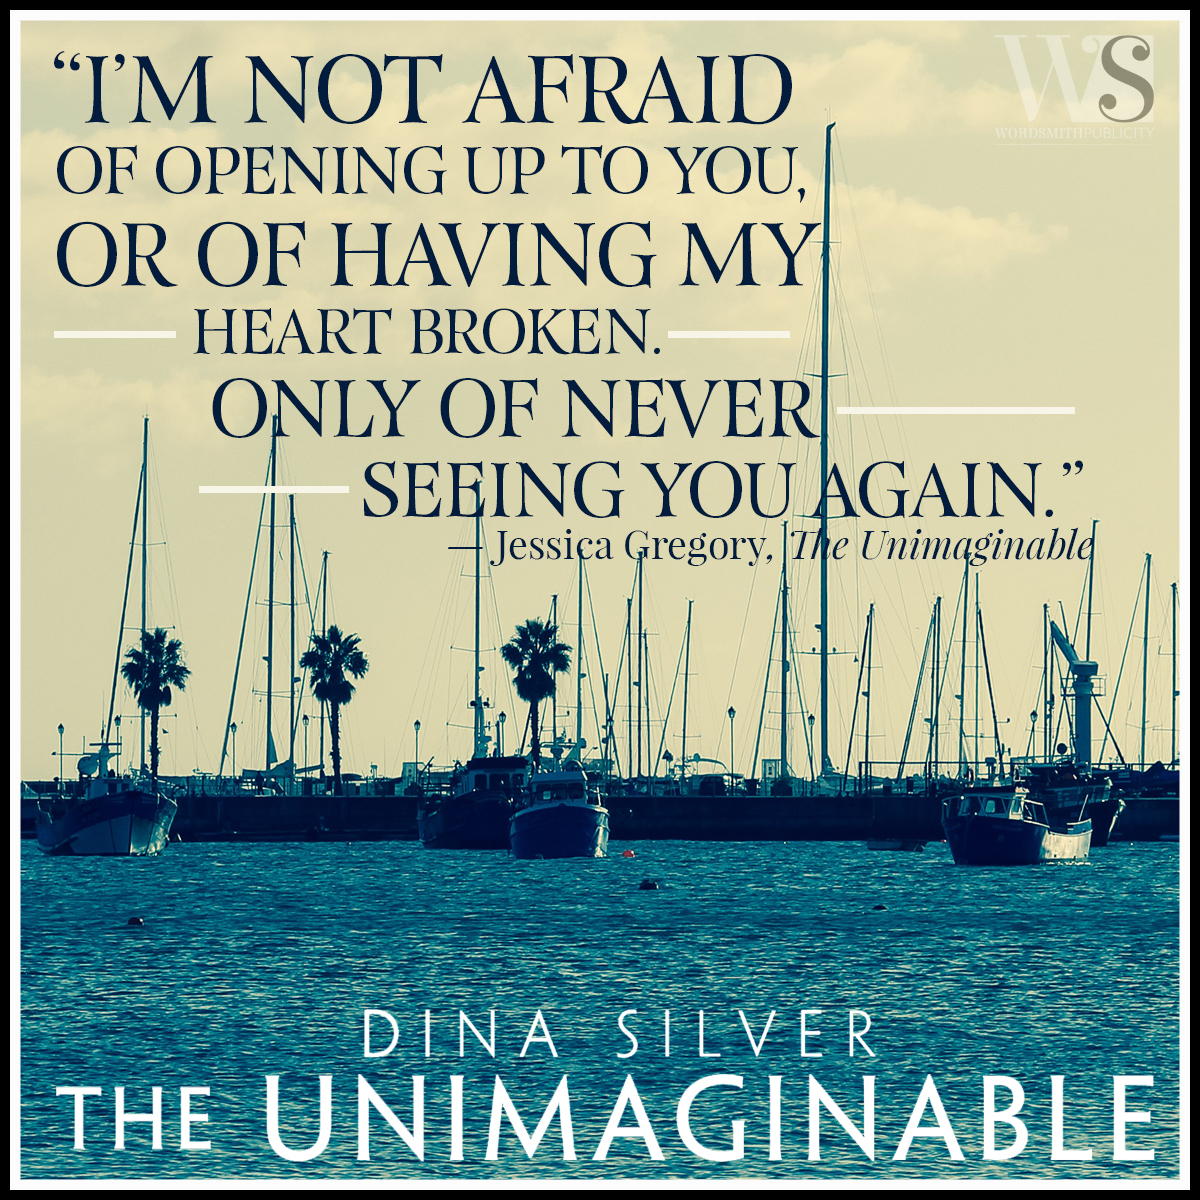 The Unimaginable by Dina Silver